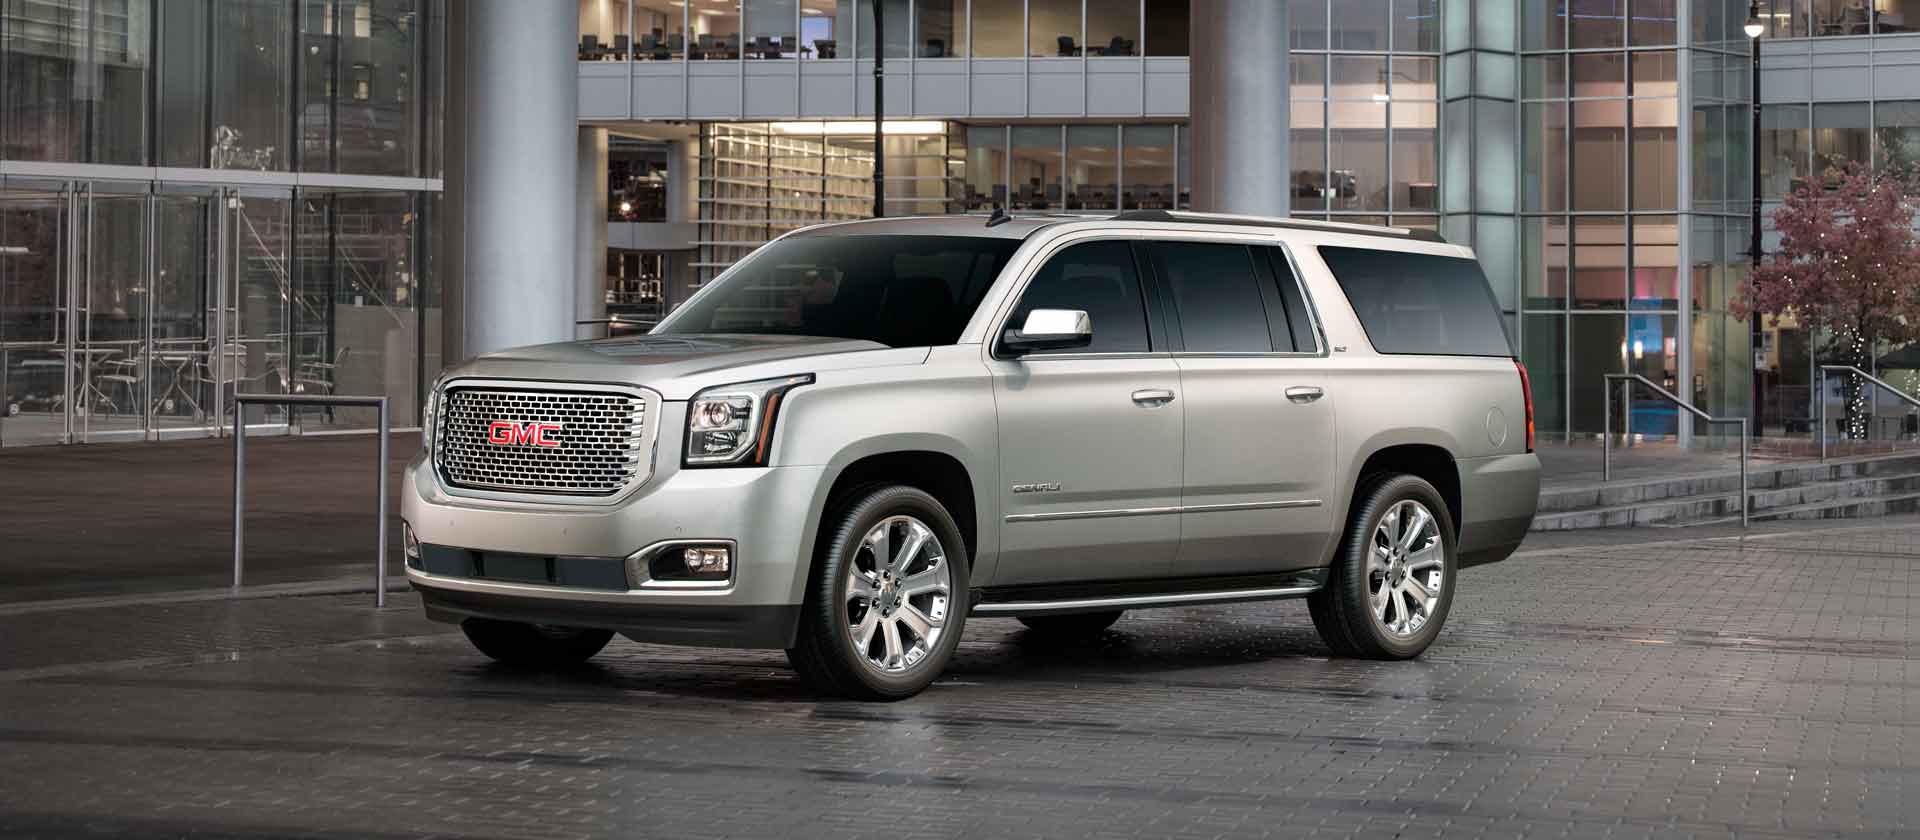 A Yacht A Brute A Magnificent Ride The 2015 Gmc Yukon